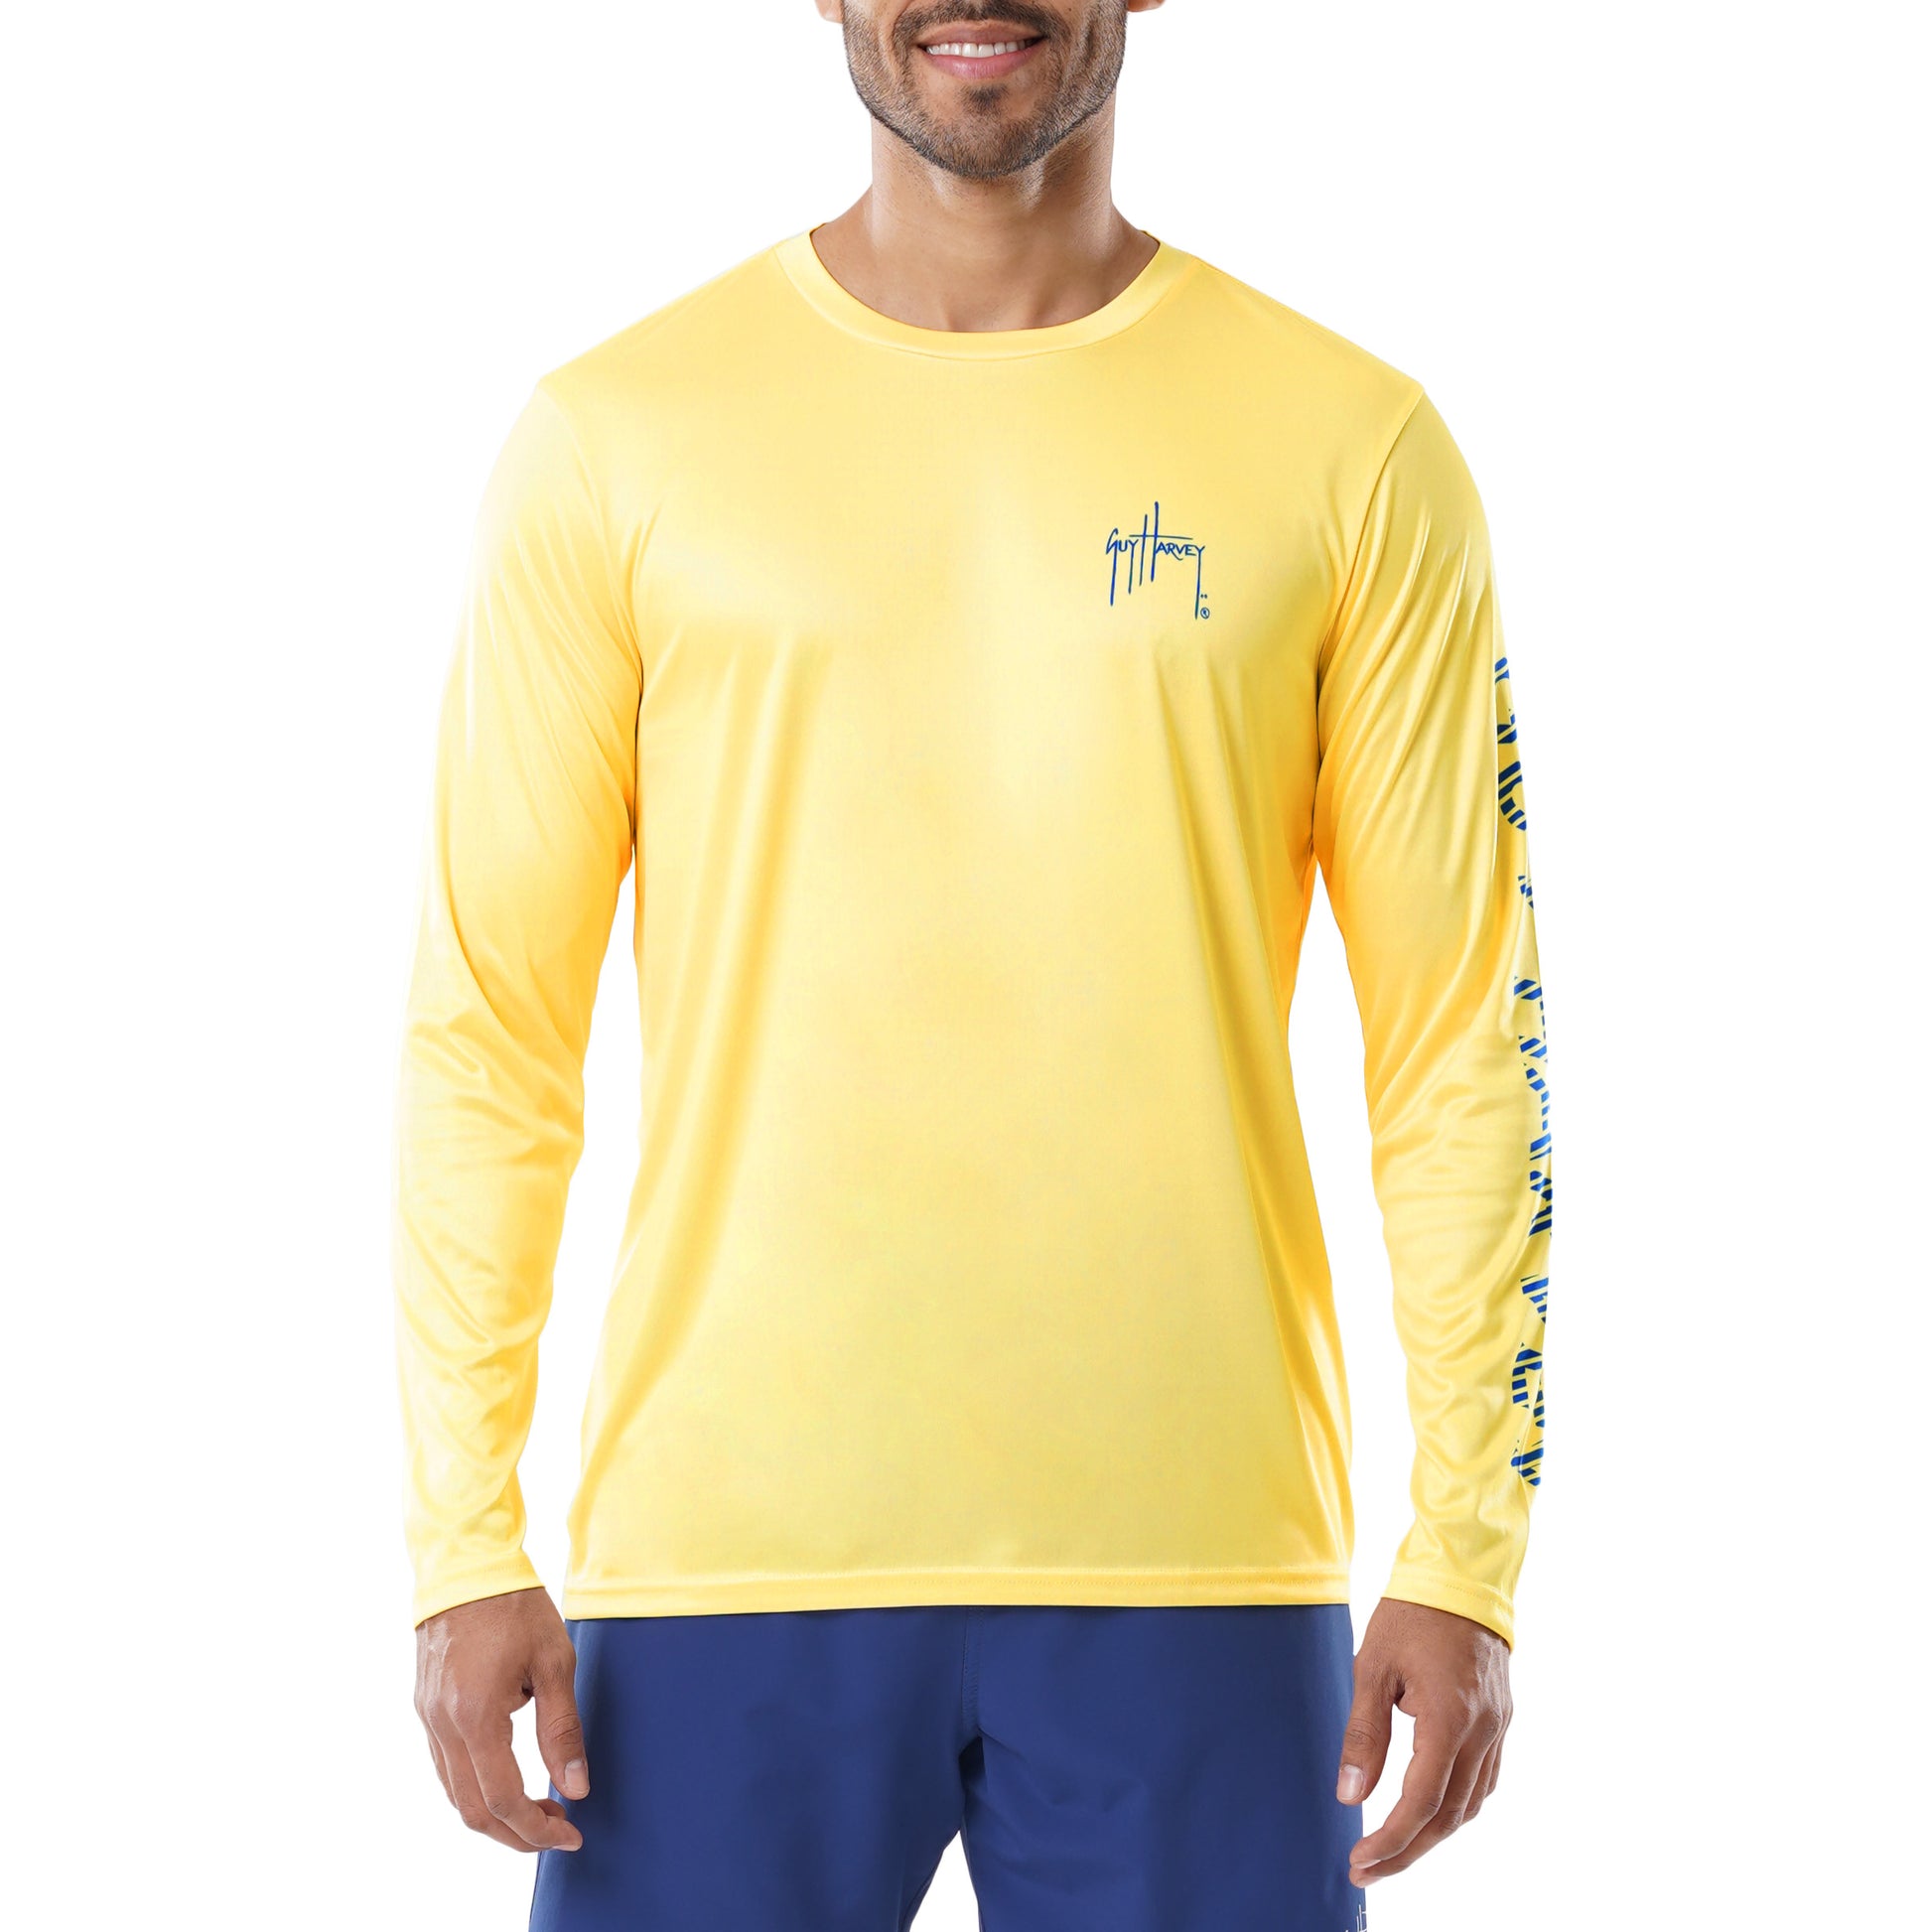 Men's The Art of Offshore Performance Sun Protection Top View 2